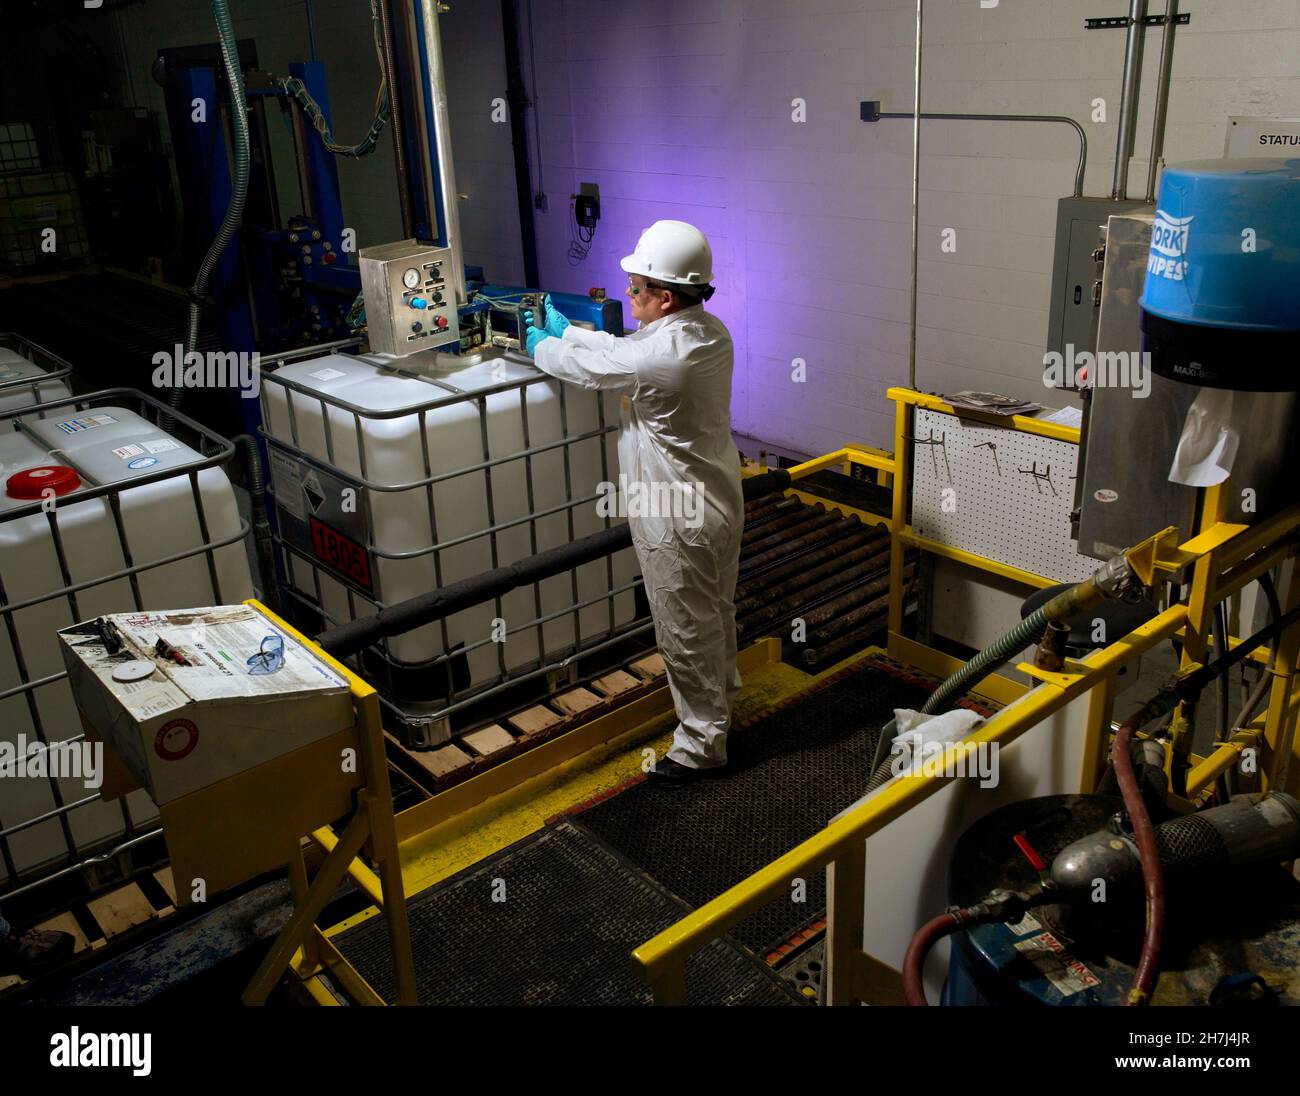 Worker in industrial chemical manufacturing facility, Philadelphia, USA Stock Photo